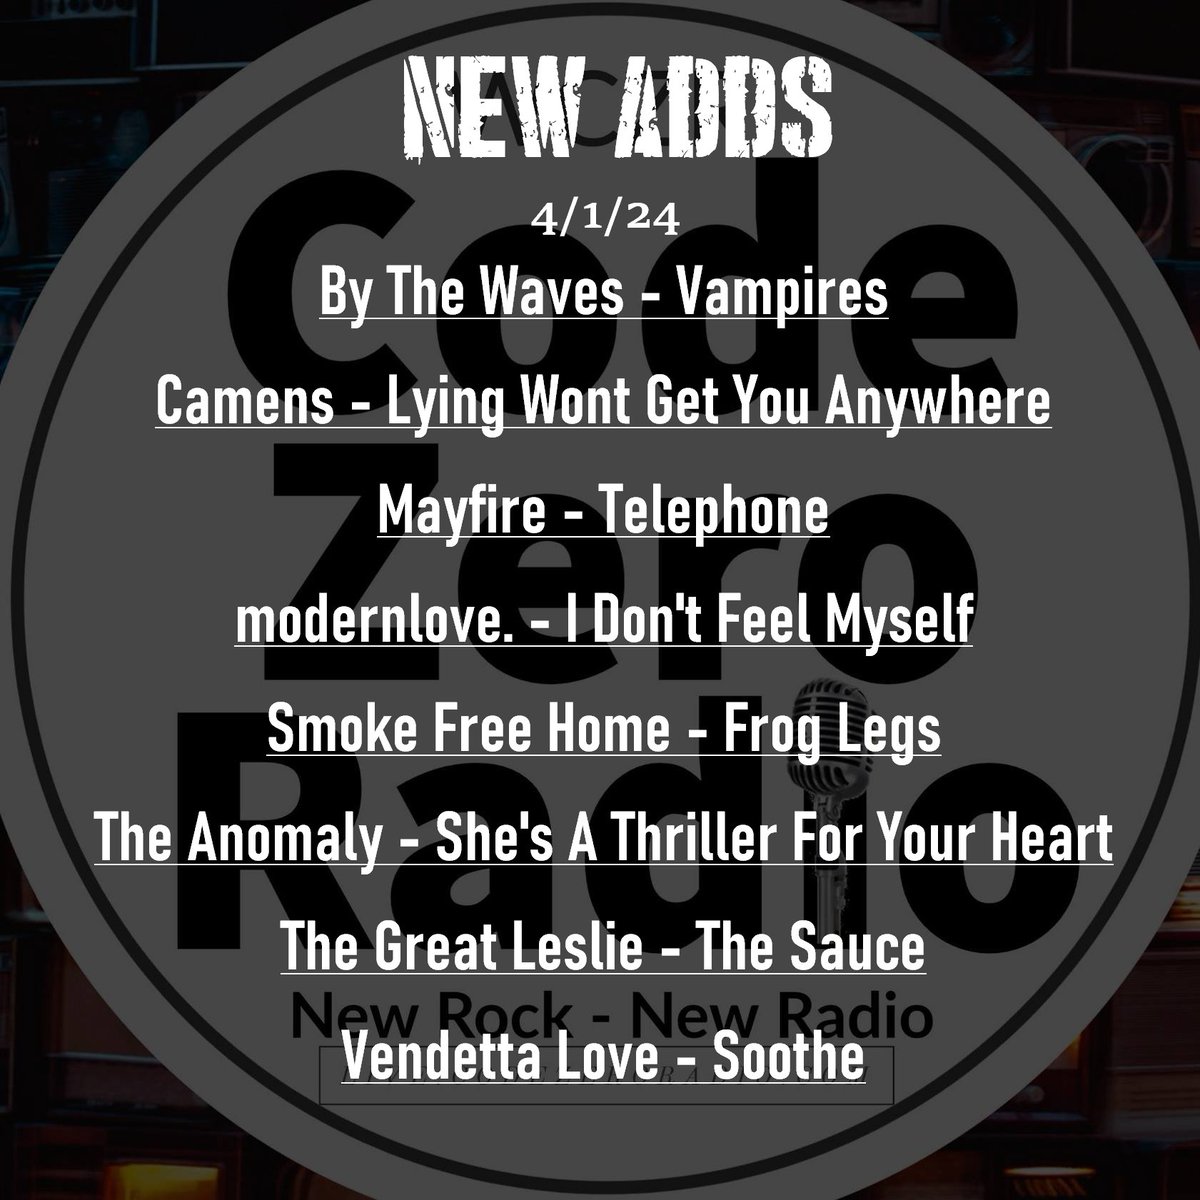 More shiny new music headed for your earholes!Now in rotation and featured on Fresh Rocks, weekdays at 1 pm CDT/ 7 pm GMT Curated for your discovery! #appstore #streaming #iPhone #Nobex #android #alternative #rock #app